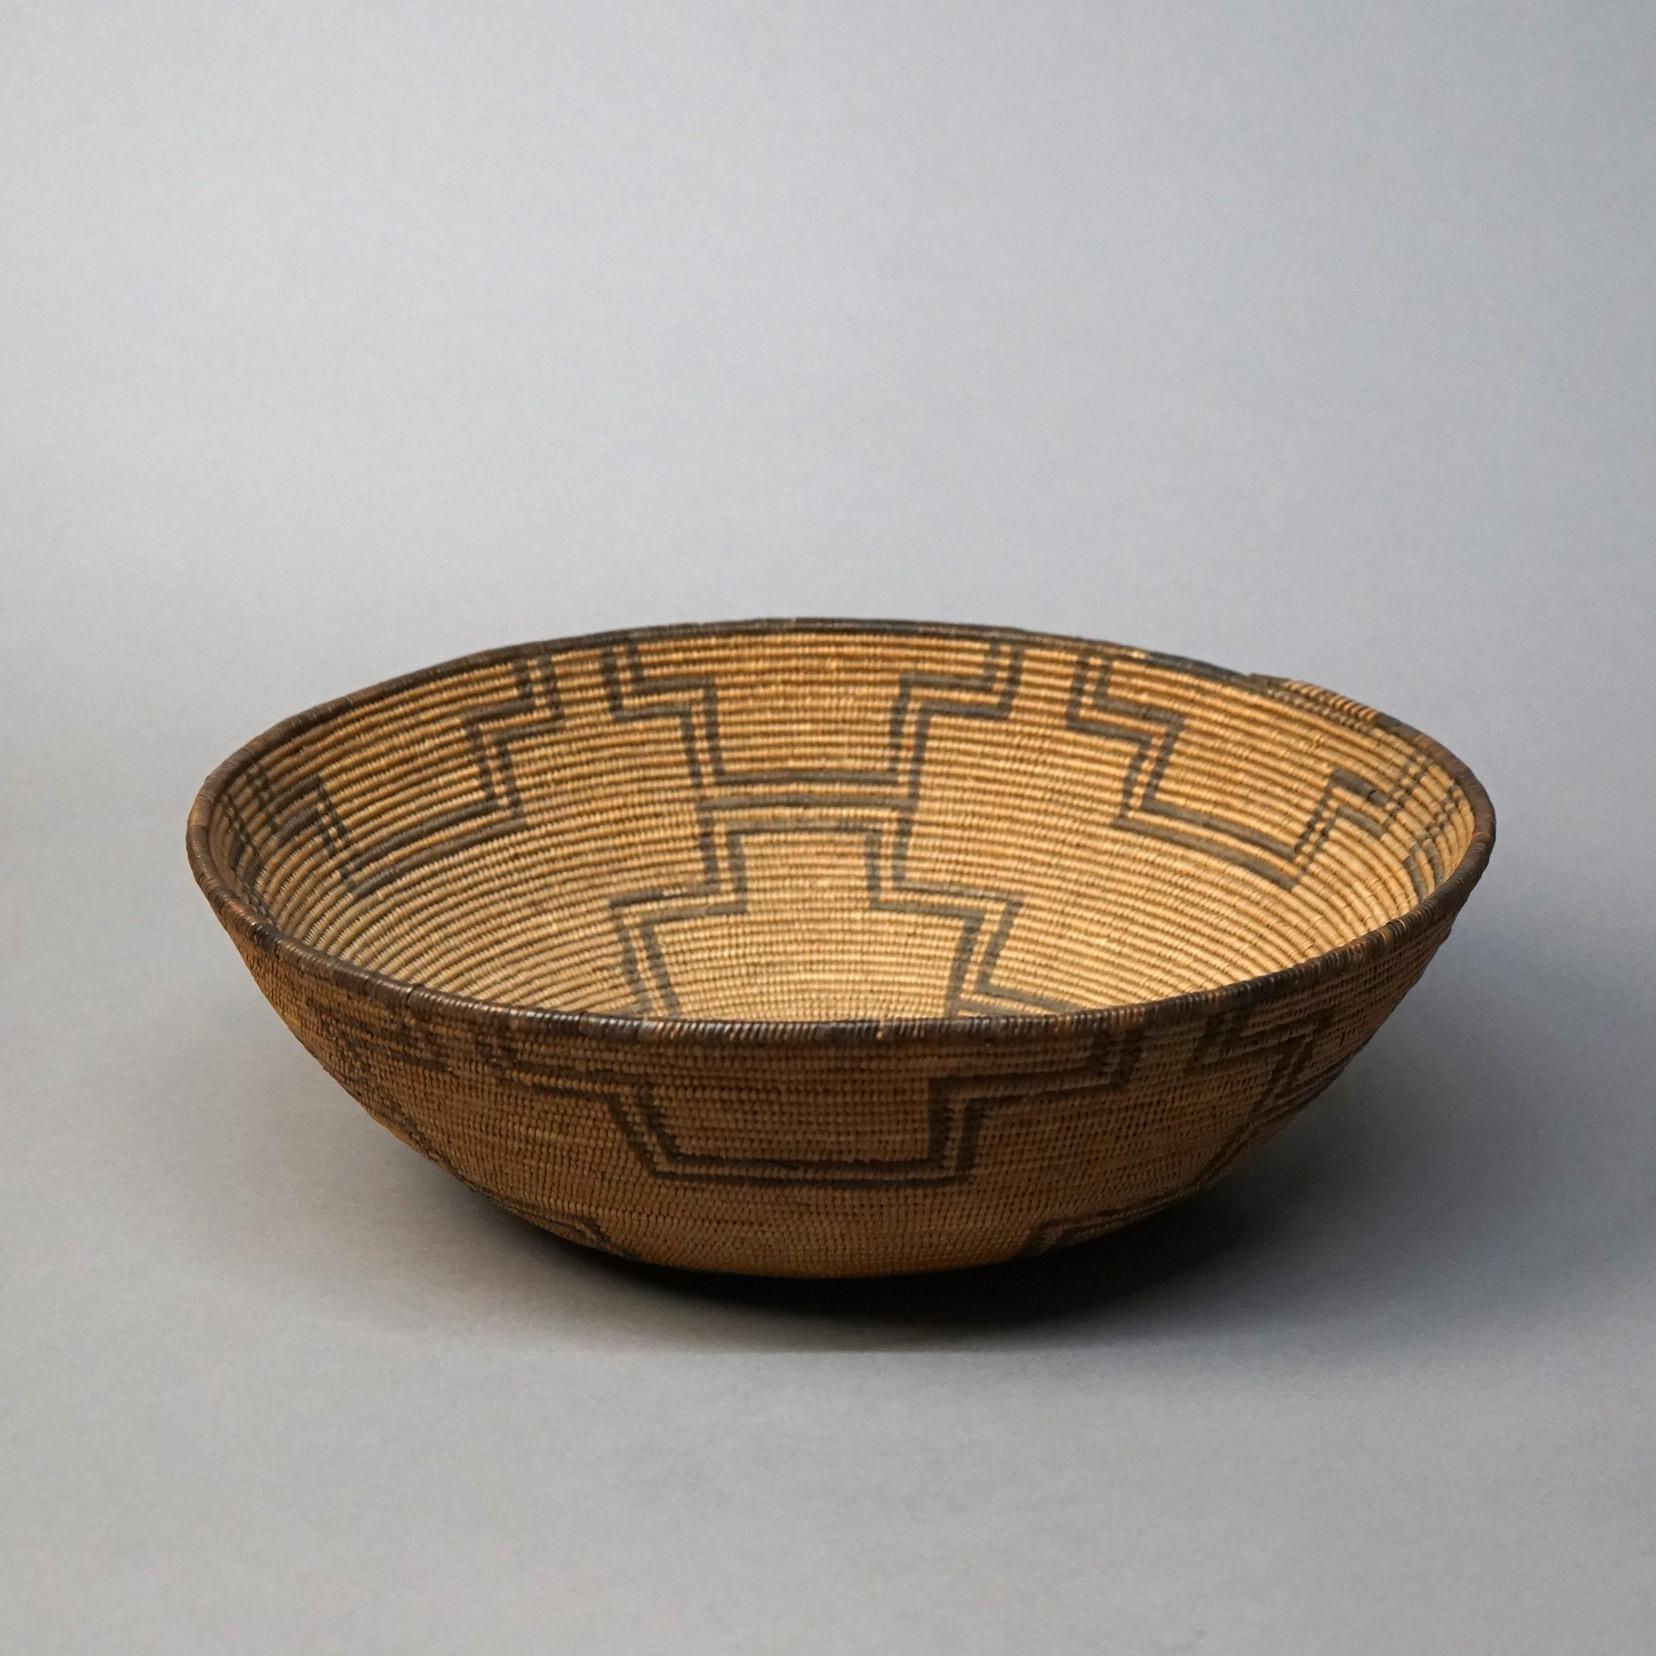 An antique and large Southwestern American Indian Navajo center basket offers woven reed construction with geometric design, c1920

Measures - 4.5